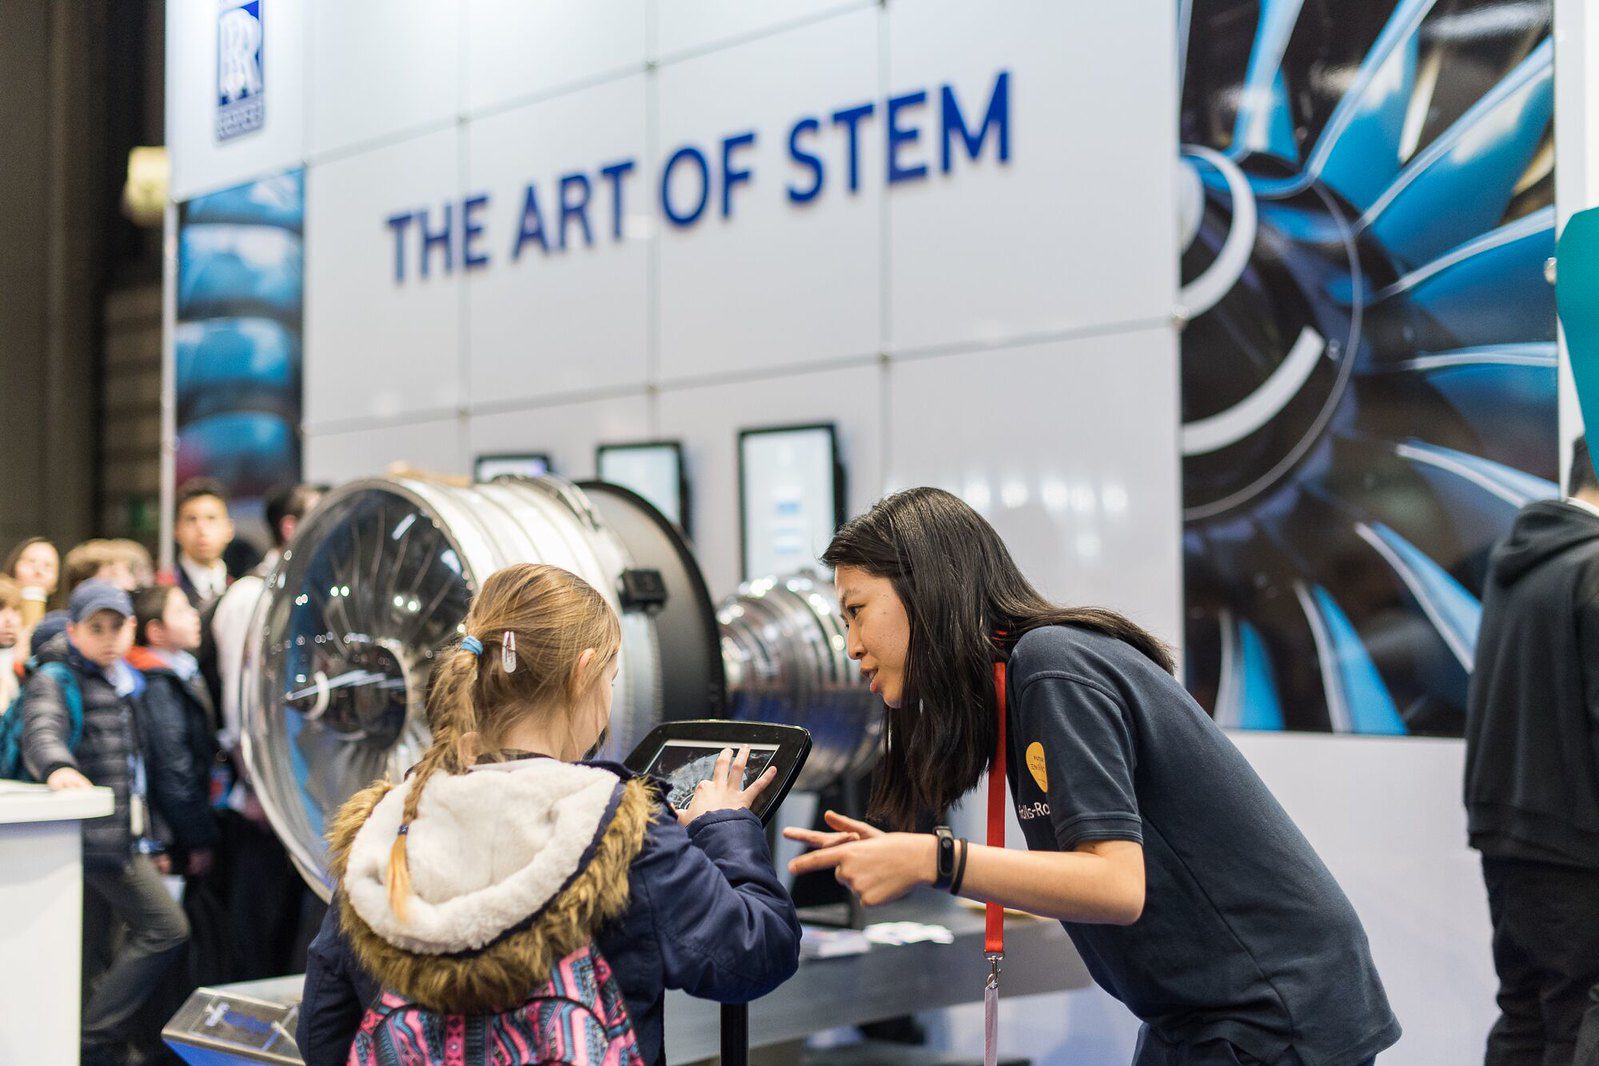 Rolls-Royce and Discovery Education launch pioneering partnership to bring STEM learning to Derbyshire primary schools